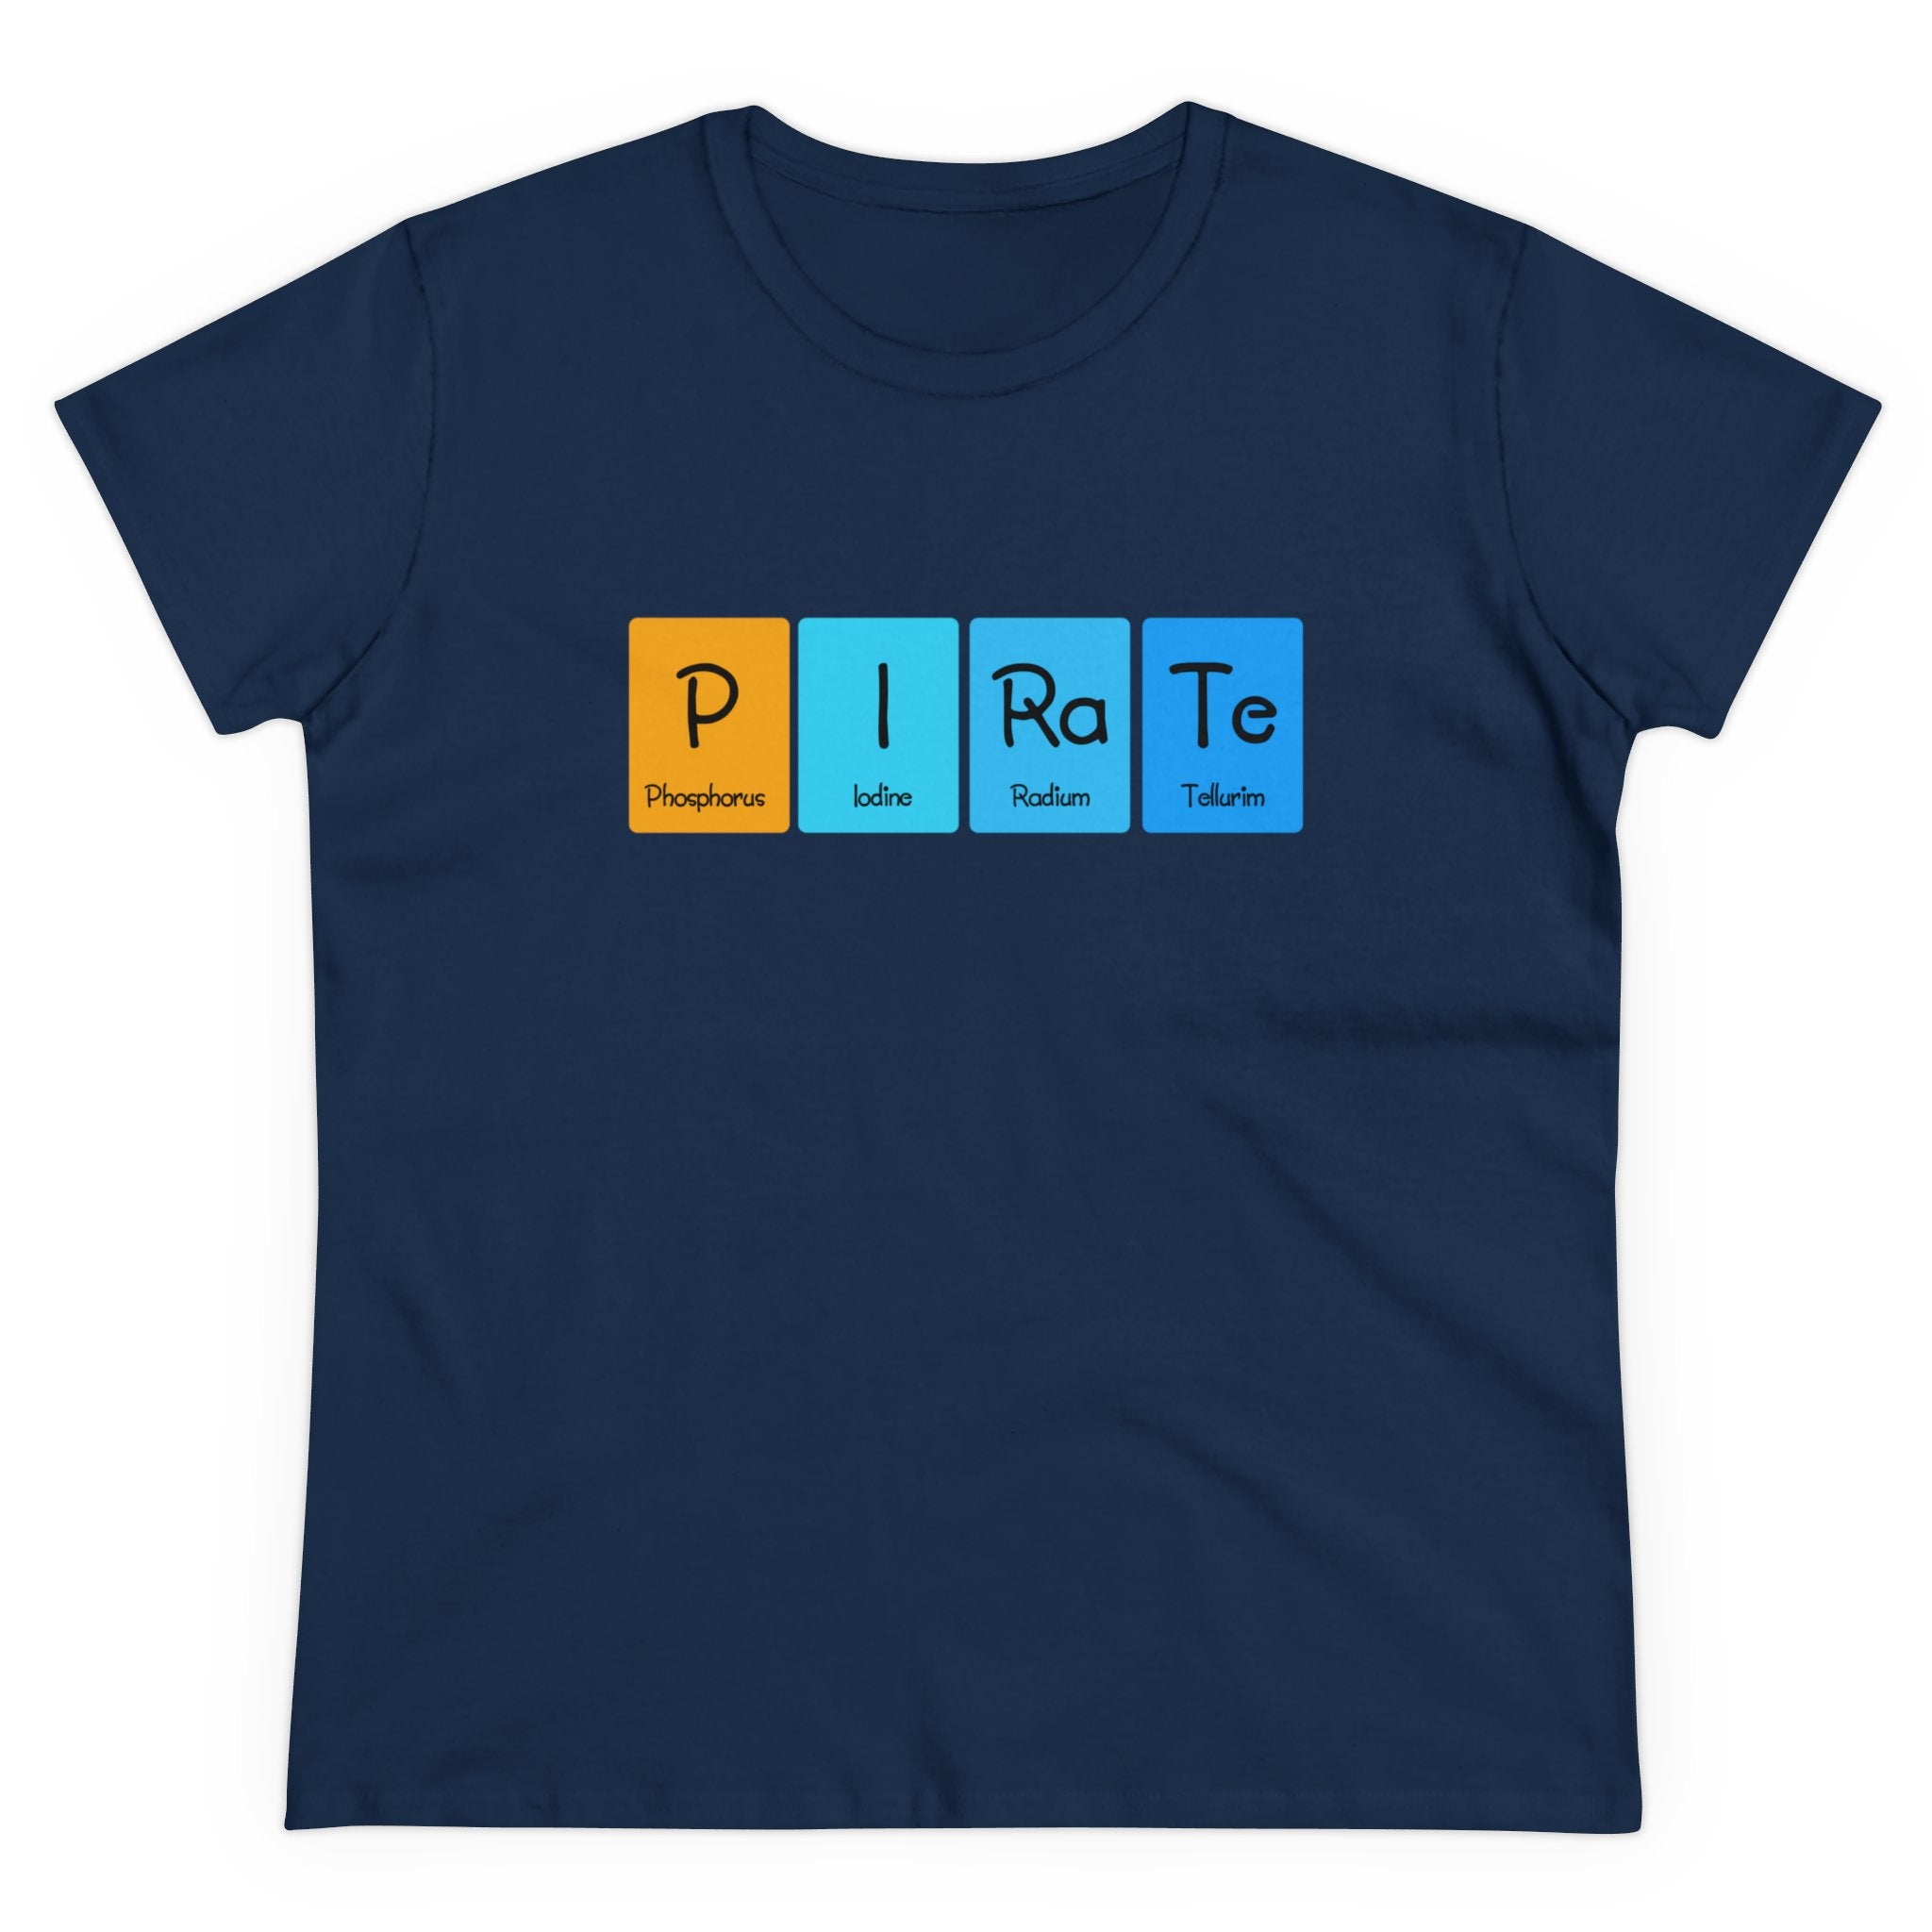 Navy blue P-I-Ra-Te - Women's Tee featuring the word "PIRATE" spelled out using chemical elements: Phosphorus (P), Iodine (I), Radium (Ra), and Tellurium (Te). Made from ethically grown cotton, this trendy t-shirt combines science geek chic with sustainable fashion.